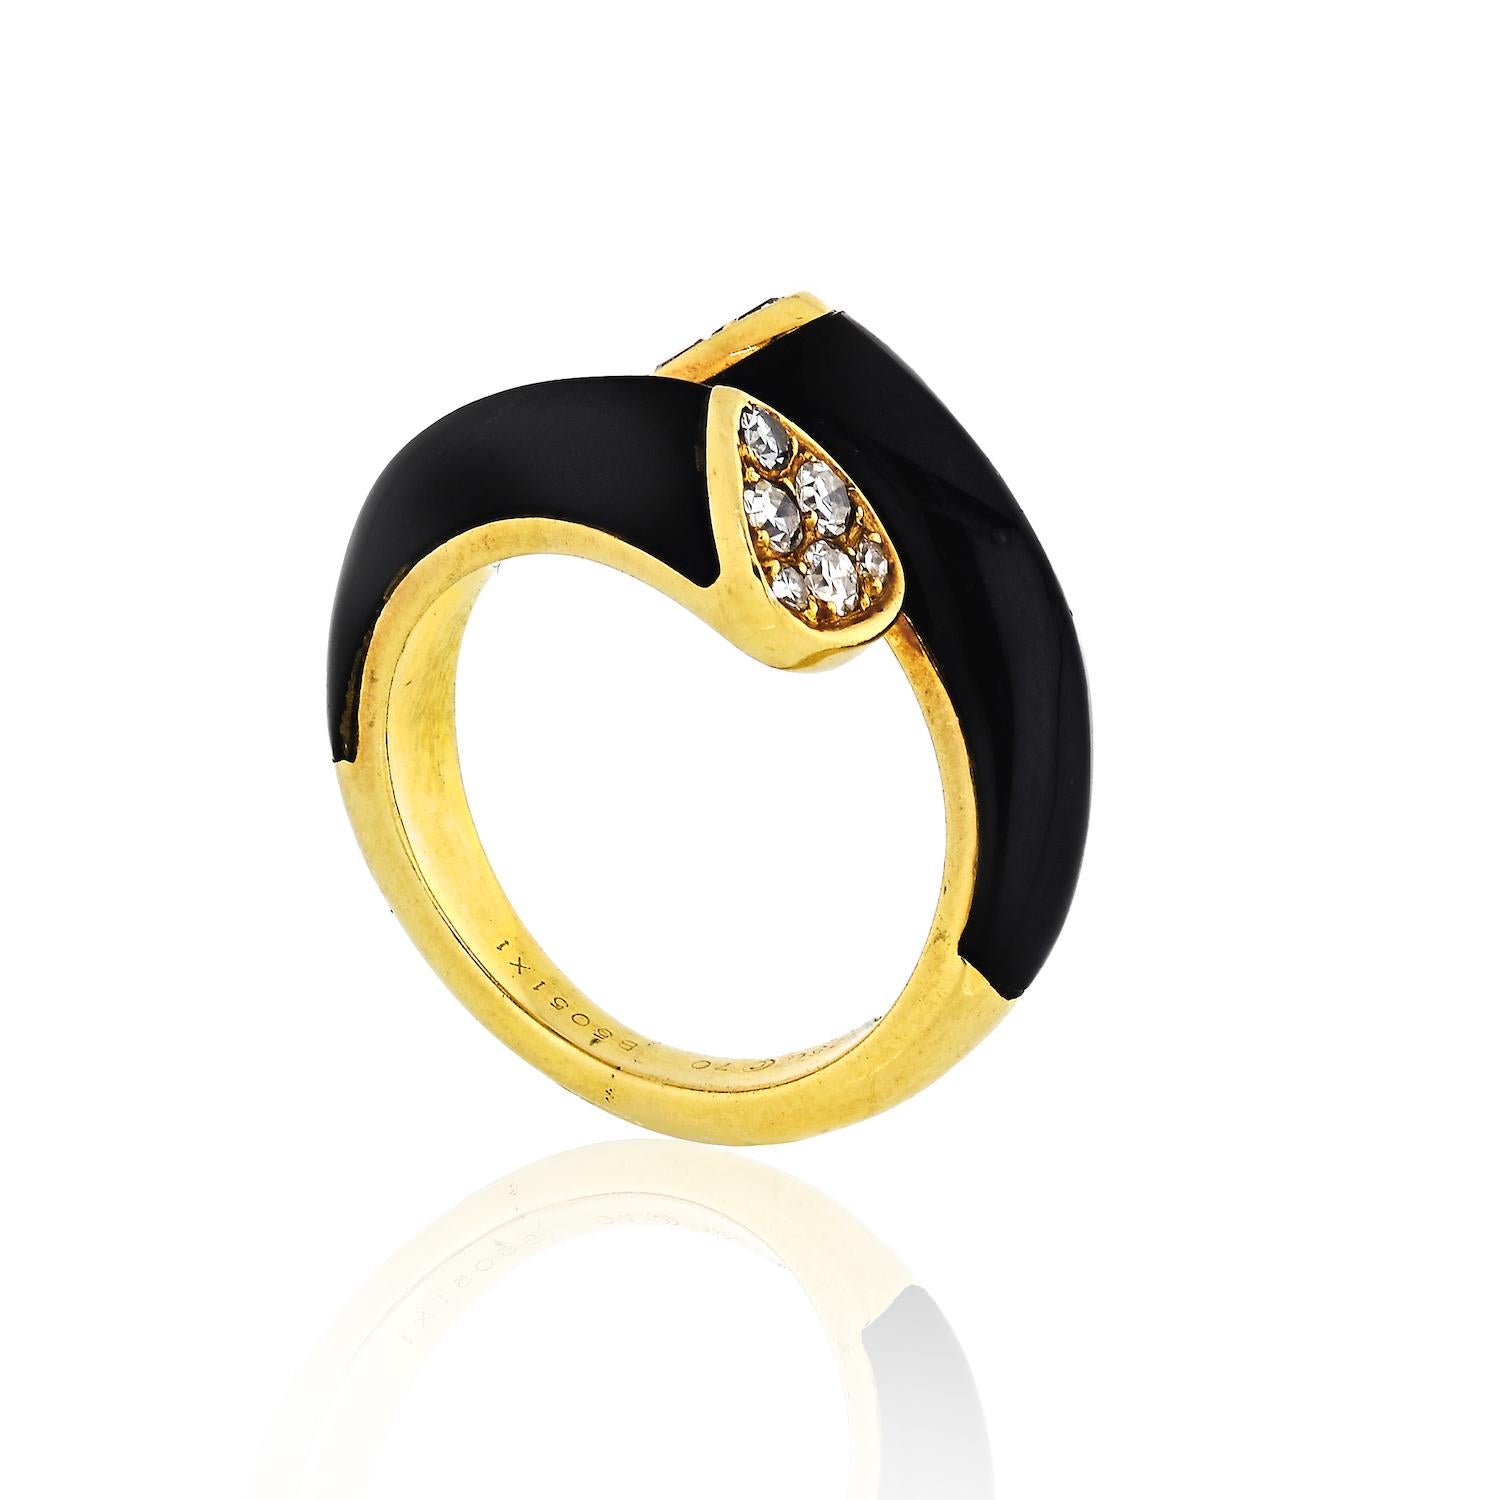 Iconic eighteen-karat yellow gold bypass ring with polished onyx inset to the crest and six round-cut white diamonds encircled at the cusp. 

Total diamond weight 0.45cts.

Size 5.5